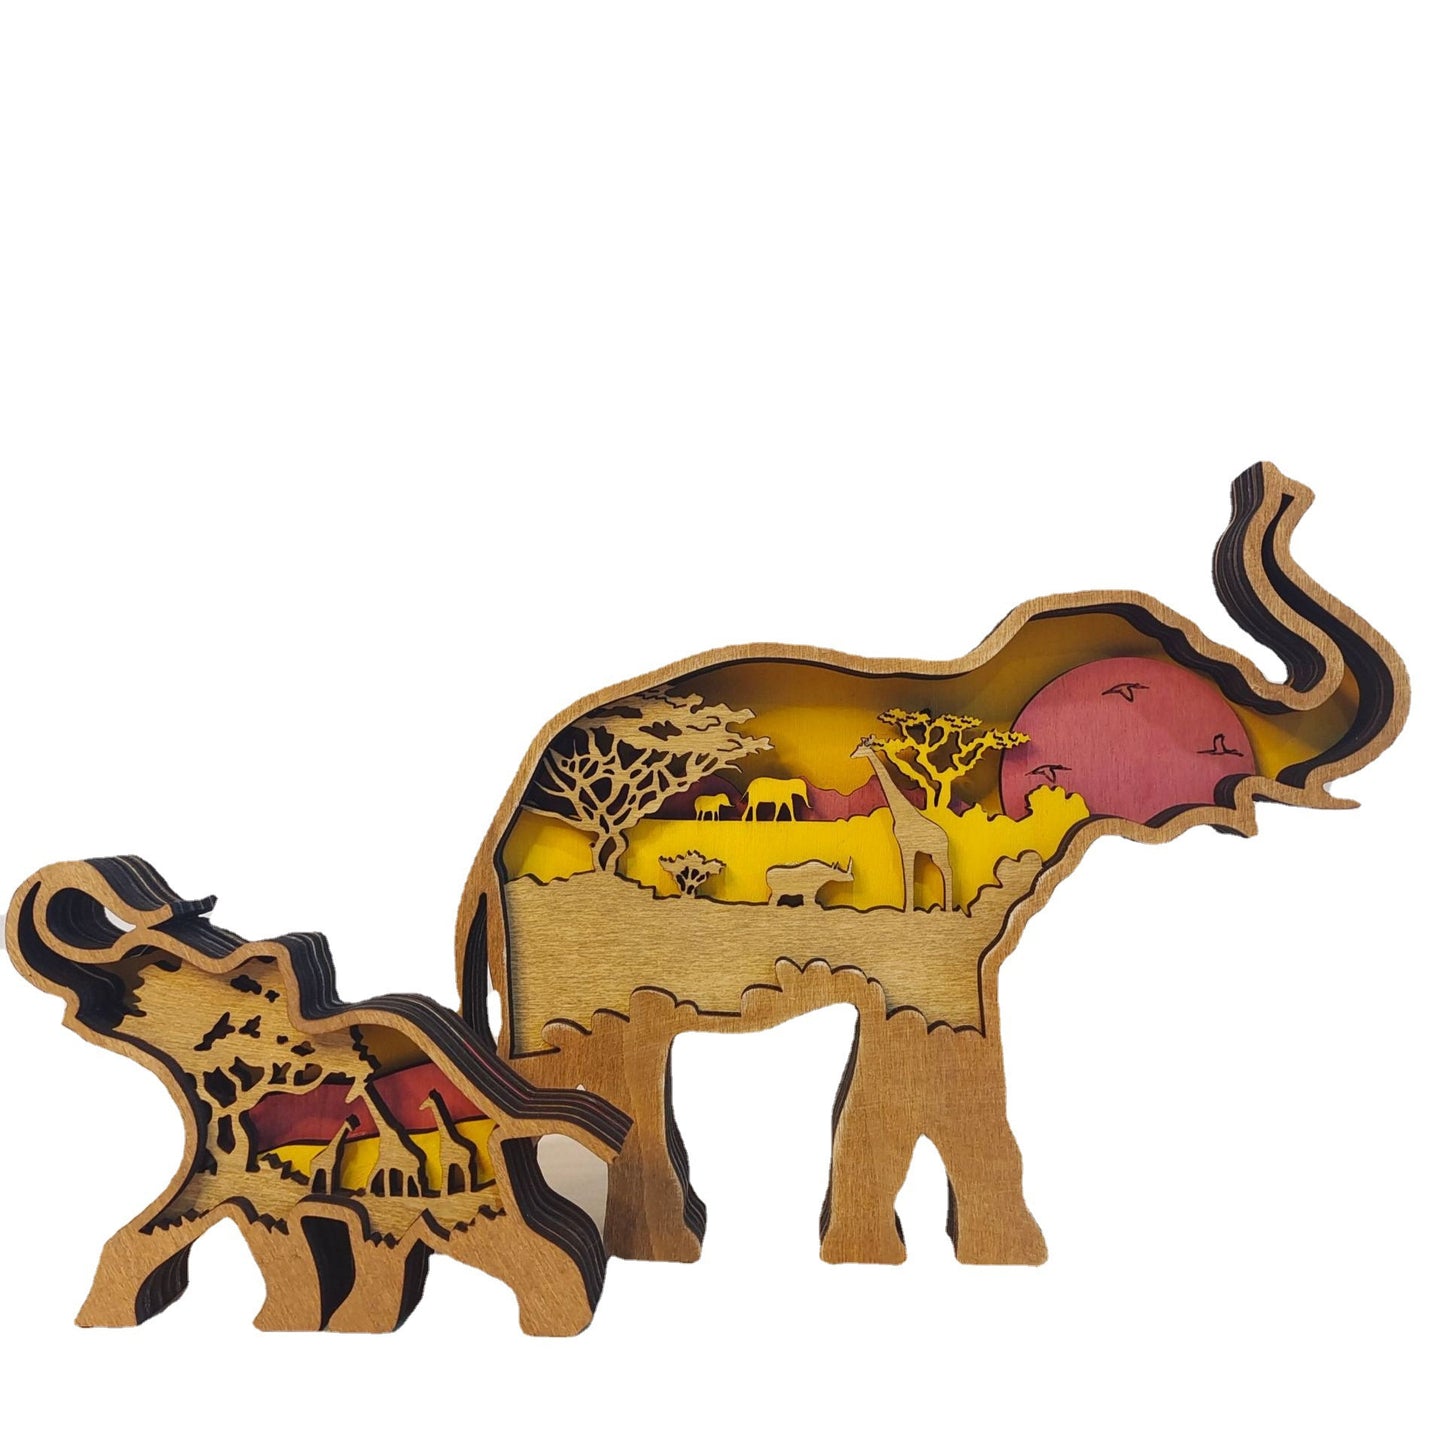 Wooden Carved Elephant Creative Home Decoration